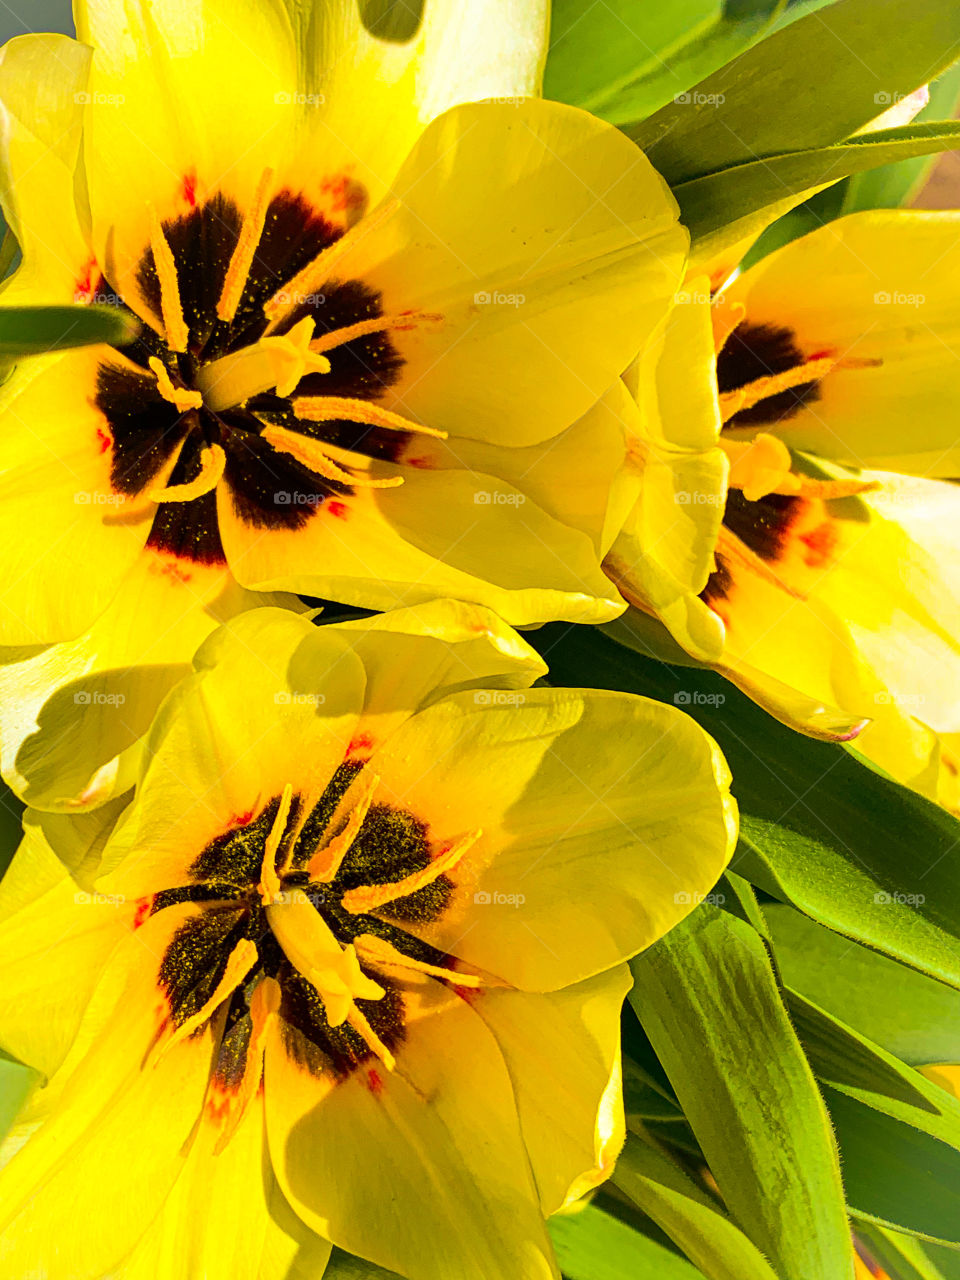 Beautiful yellow tulips stretch their faces to the springtime sun. Flowers are one of nature's joys!